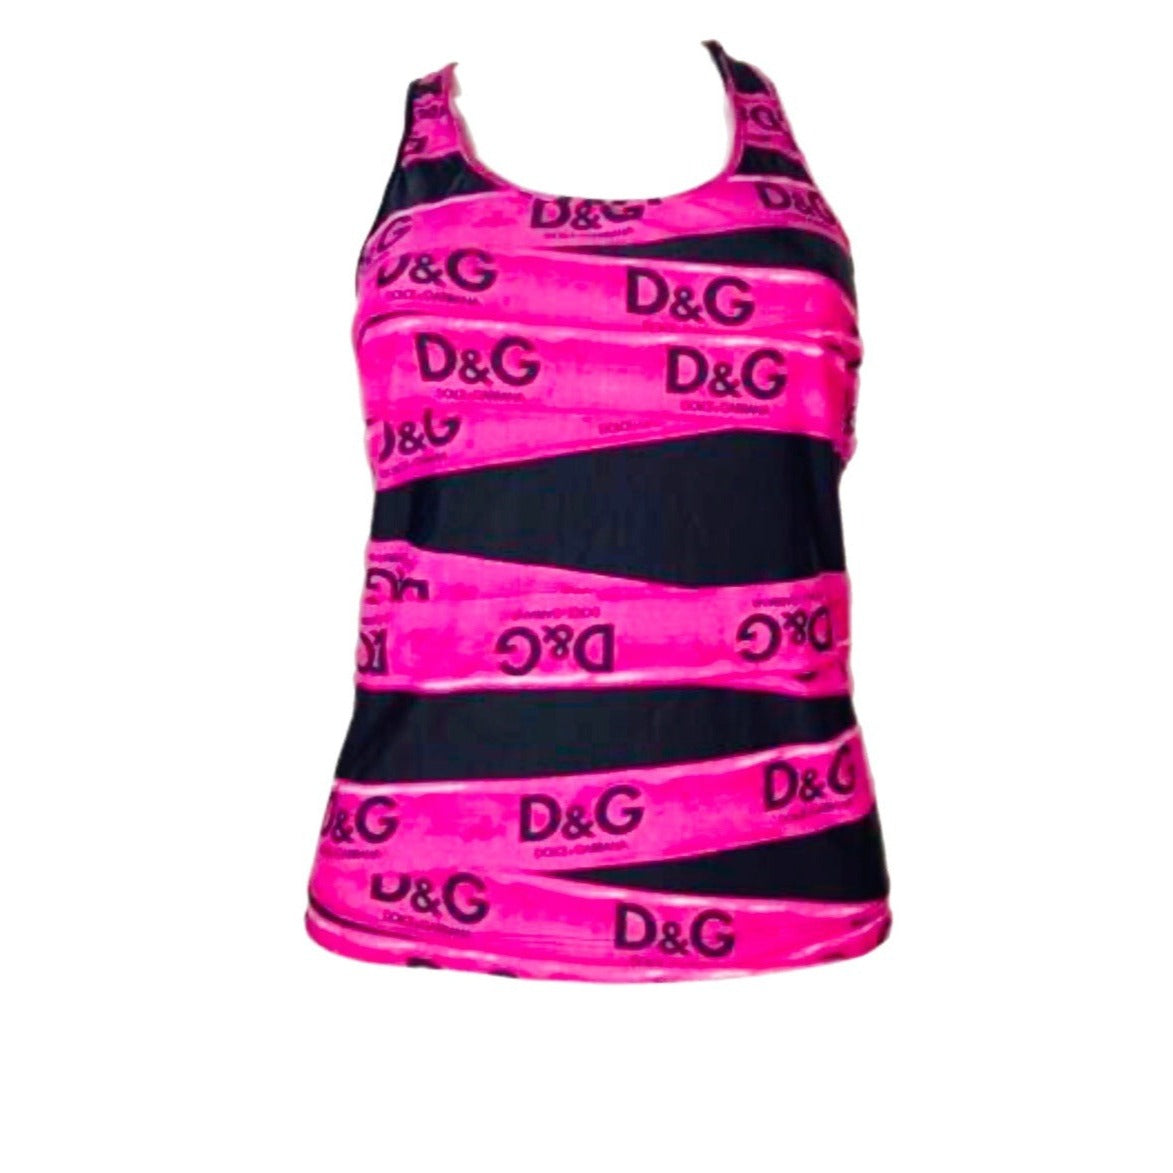 Elevate style with D&G Pink/Black Caution Tape Tank. Black/pink color, size XS 24/38. Made of bathing suit material, stretchy.